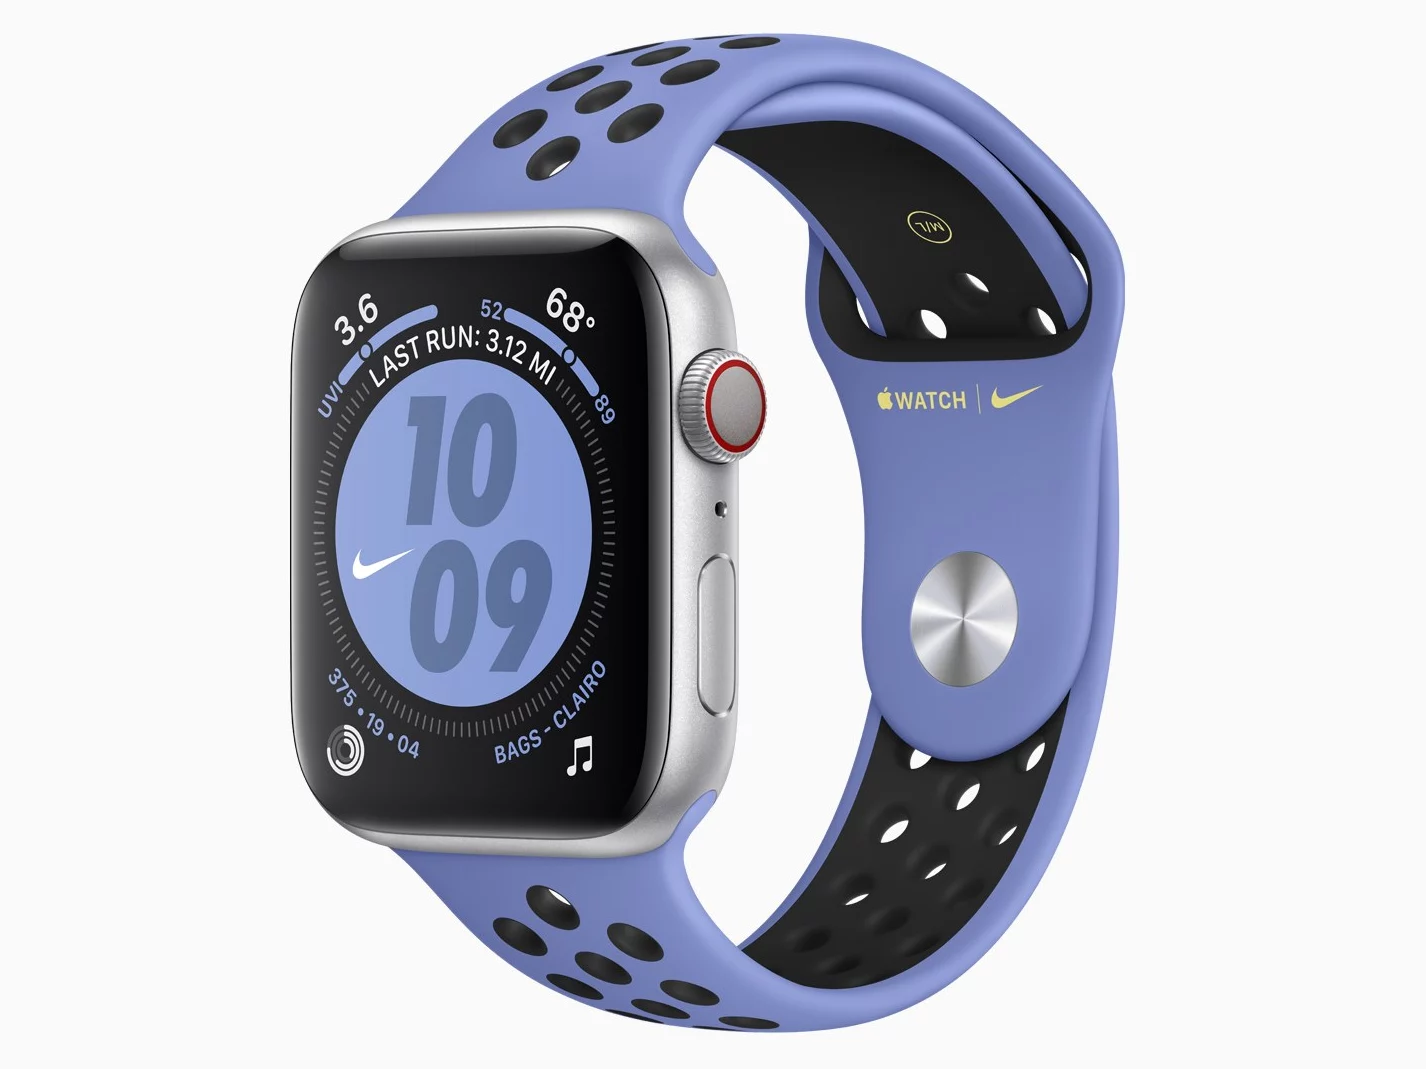 Apple Watch Series 5 Cellular Deals Flash Sales, UP TO 62% OFF 